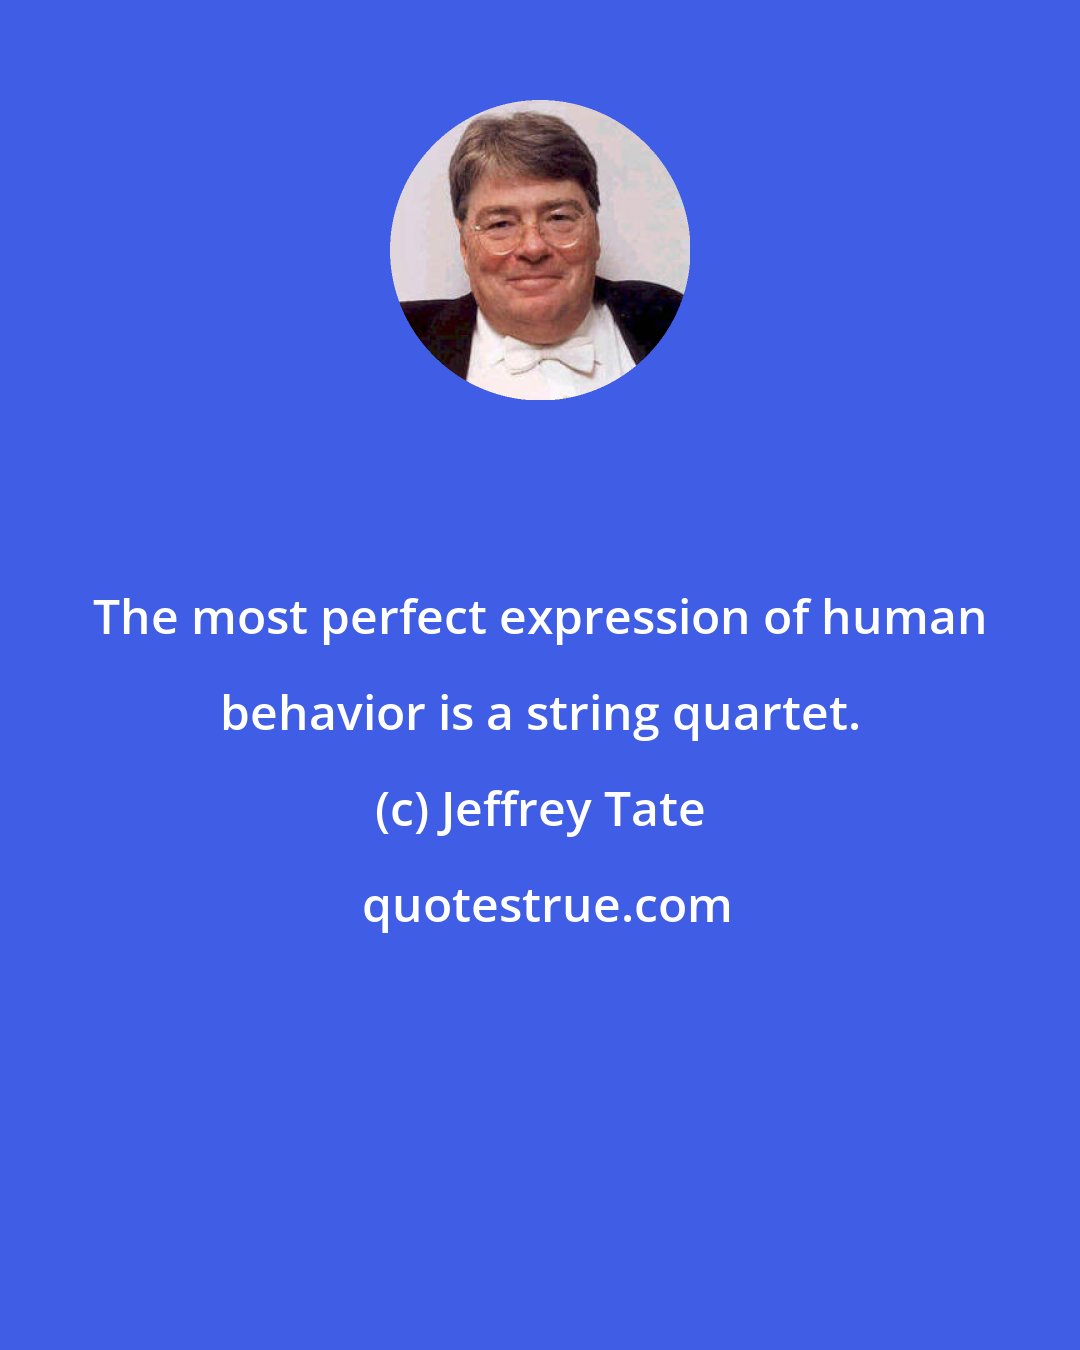 Jeffrey Tate: The most perfect expression of human behavior is a string quartet.